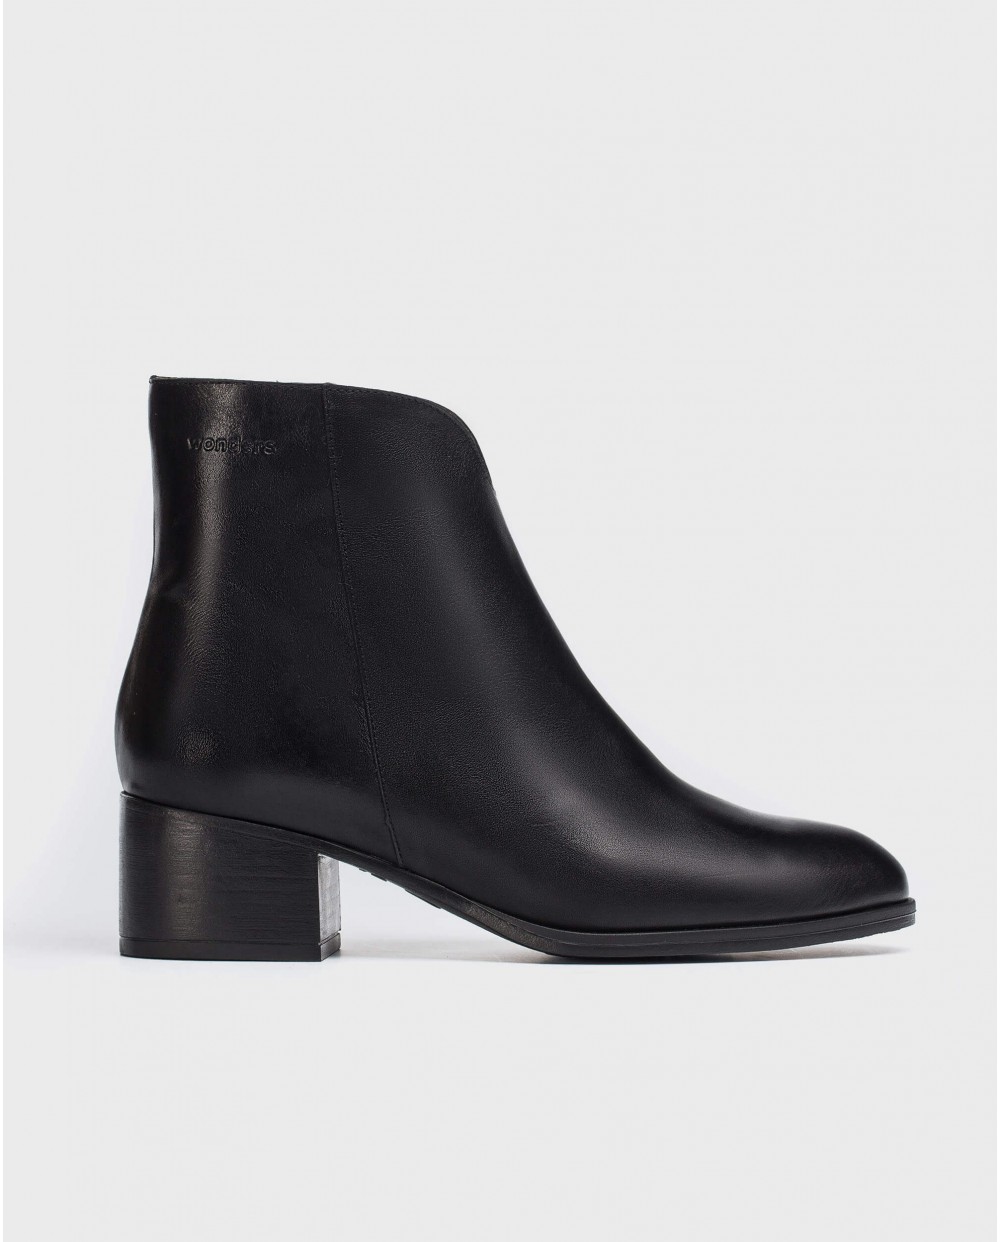 Wonders-Ankle Boots-Ankle boot with front cut out detail